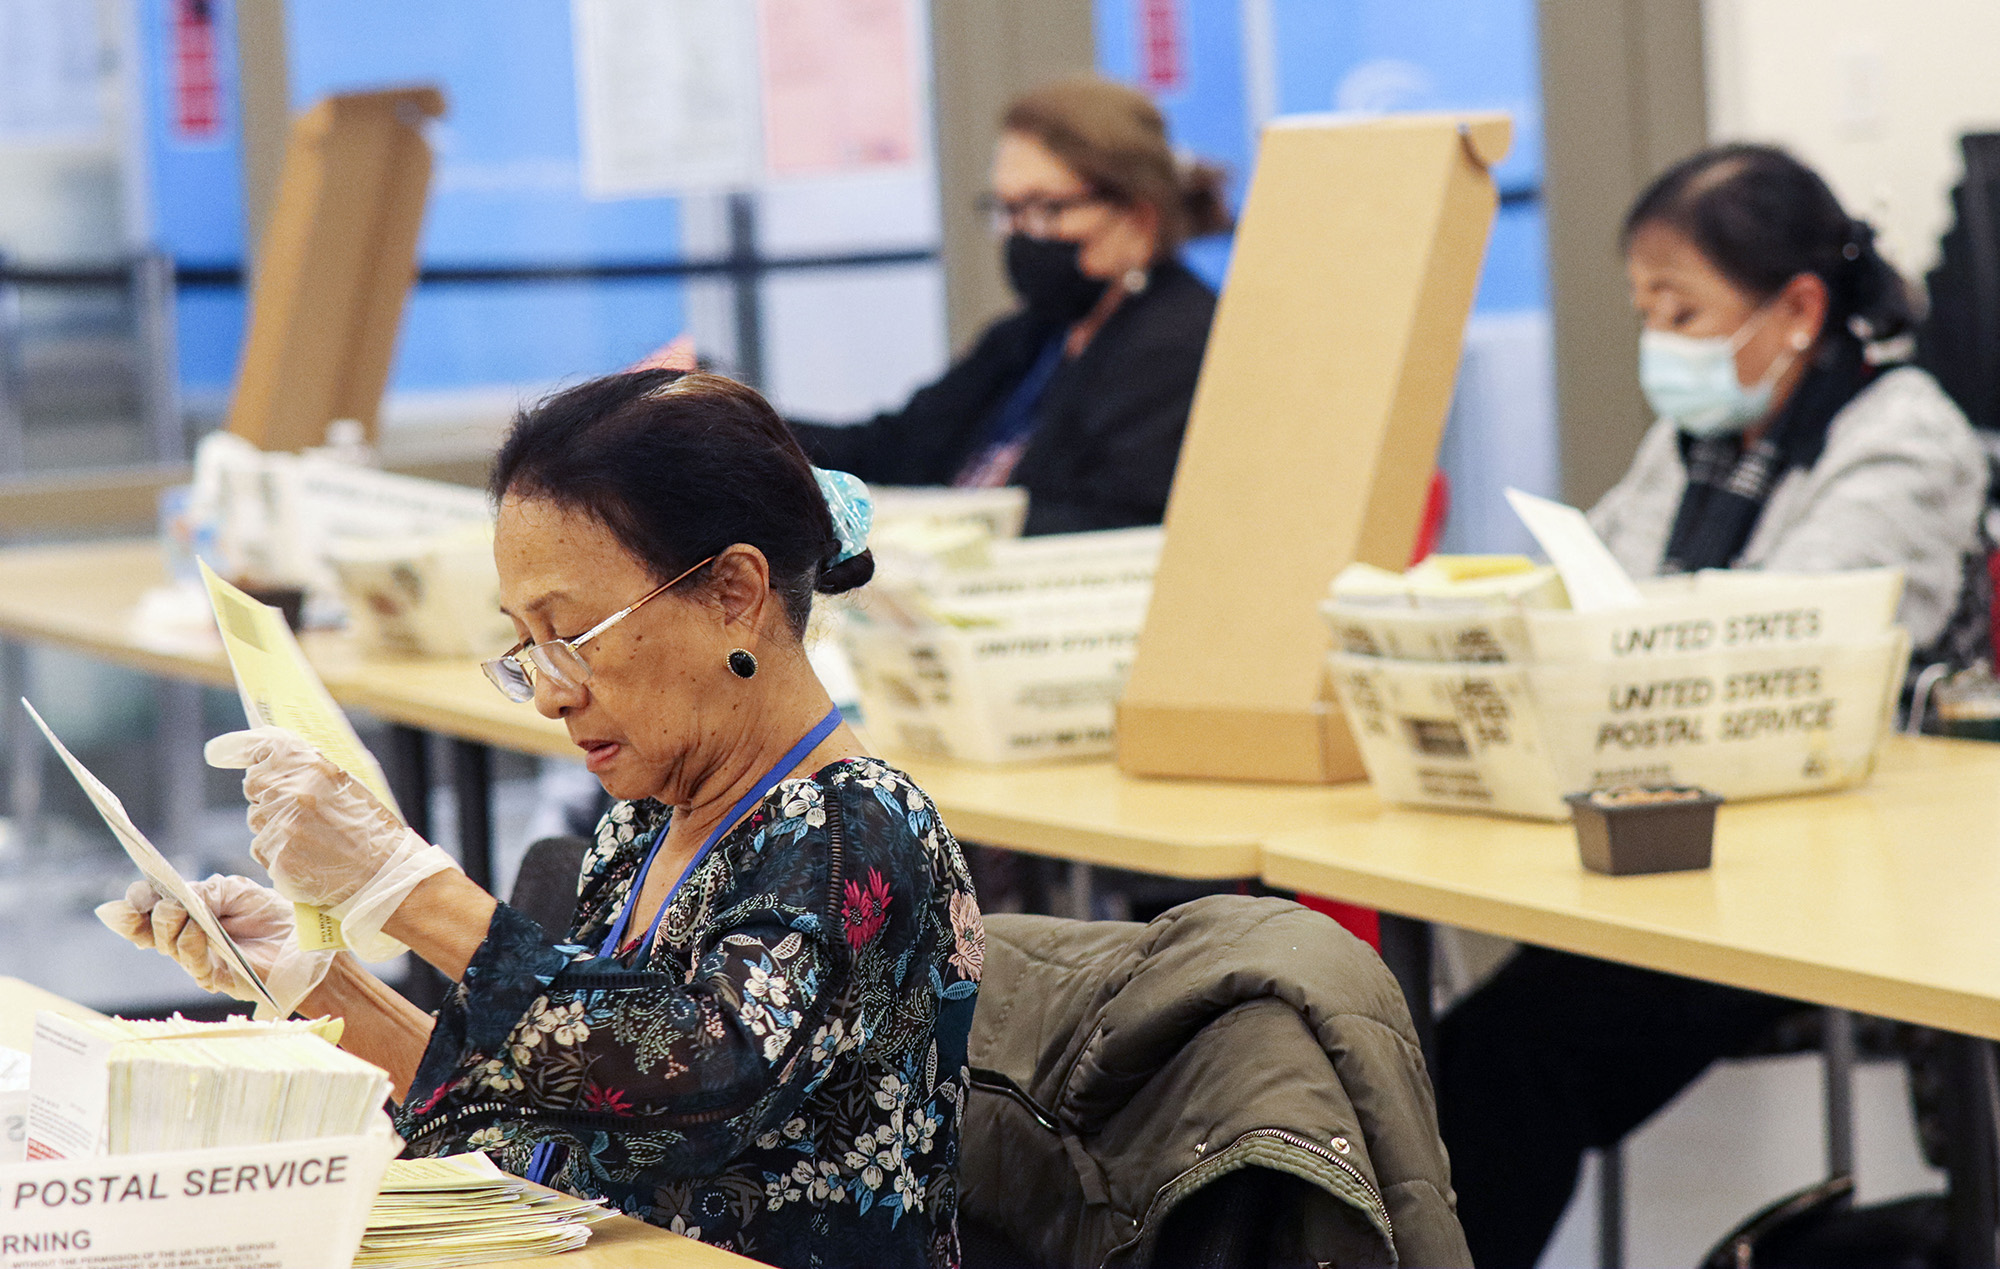 Poll workers sort ballots at The San Diego County Registrar of Voters, on the eve of the US midterm elections, in San Diego, California, on November 7.